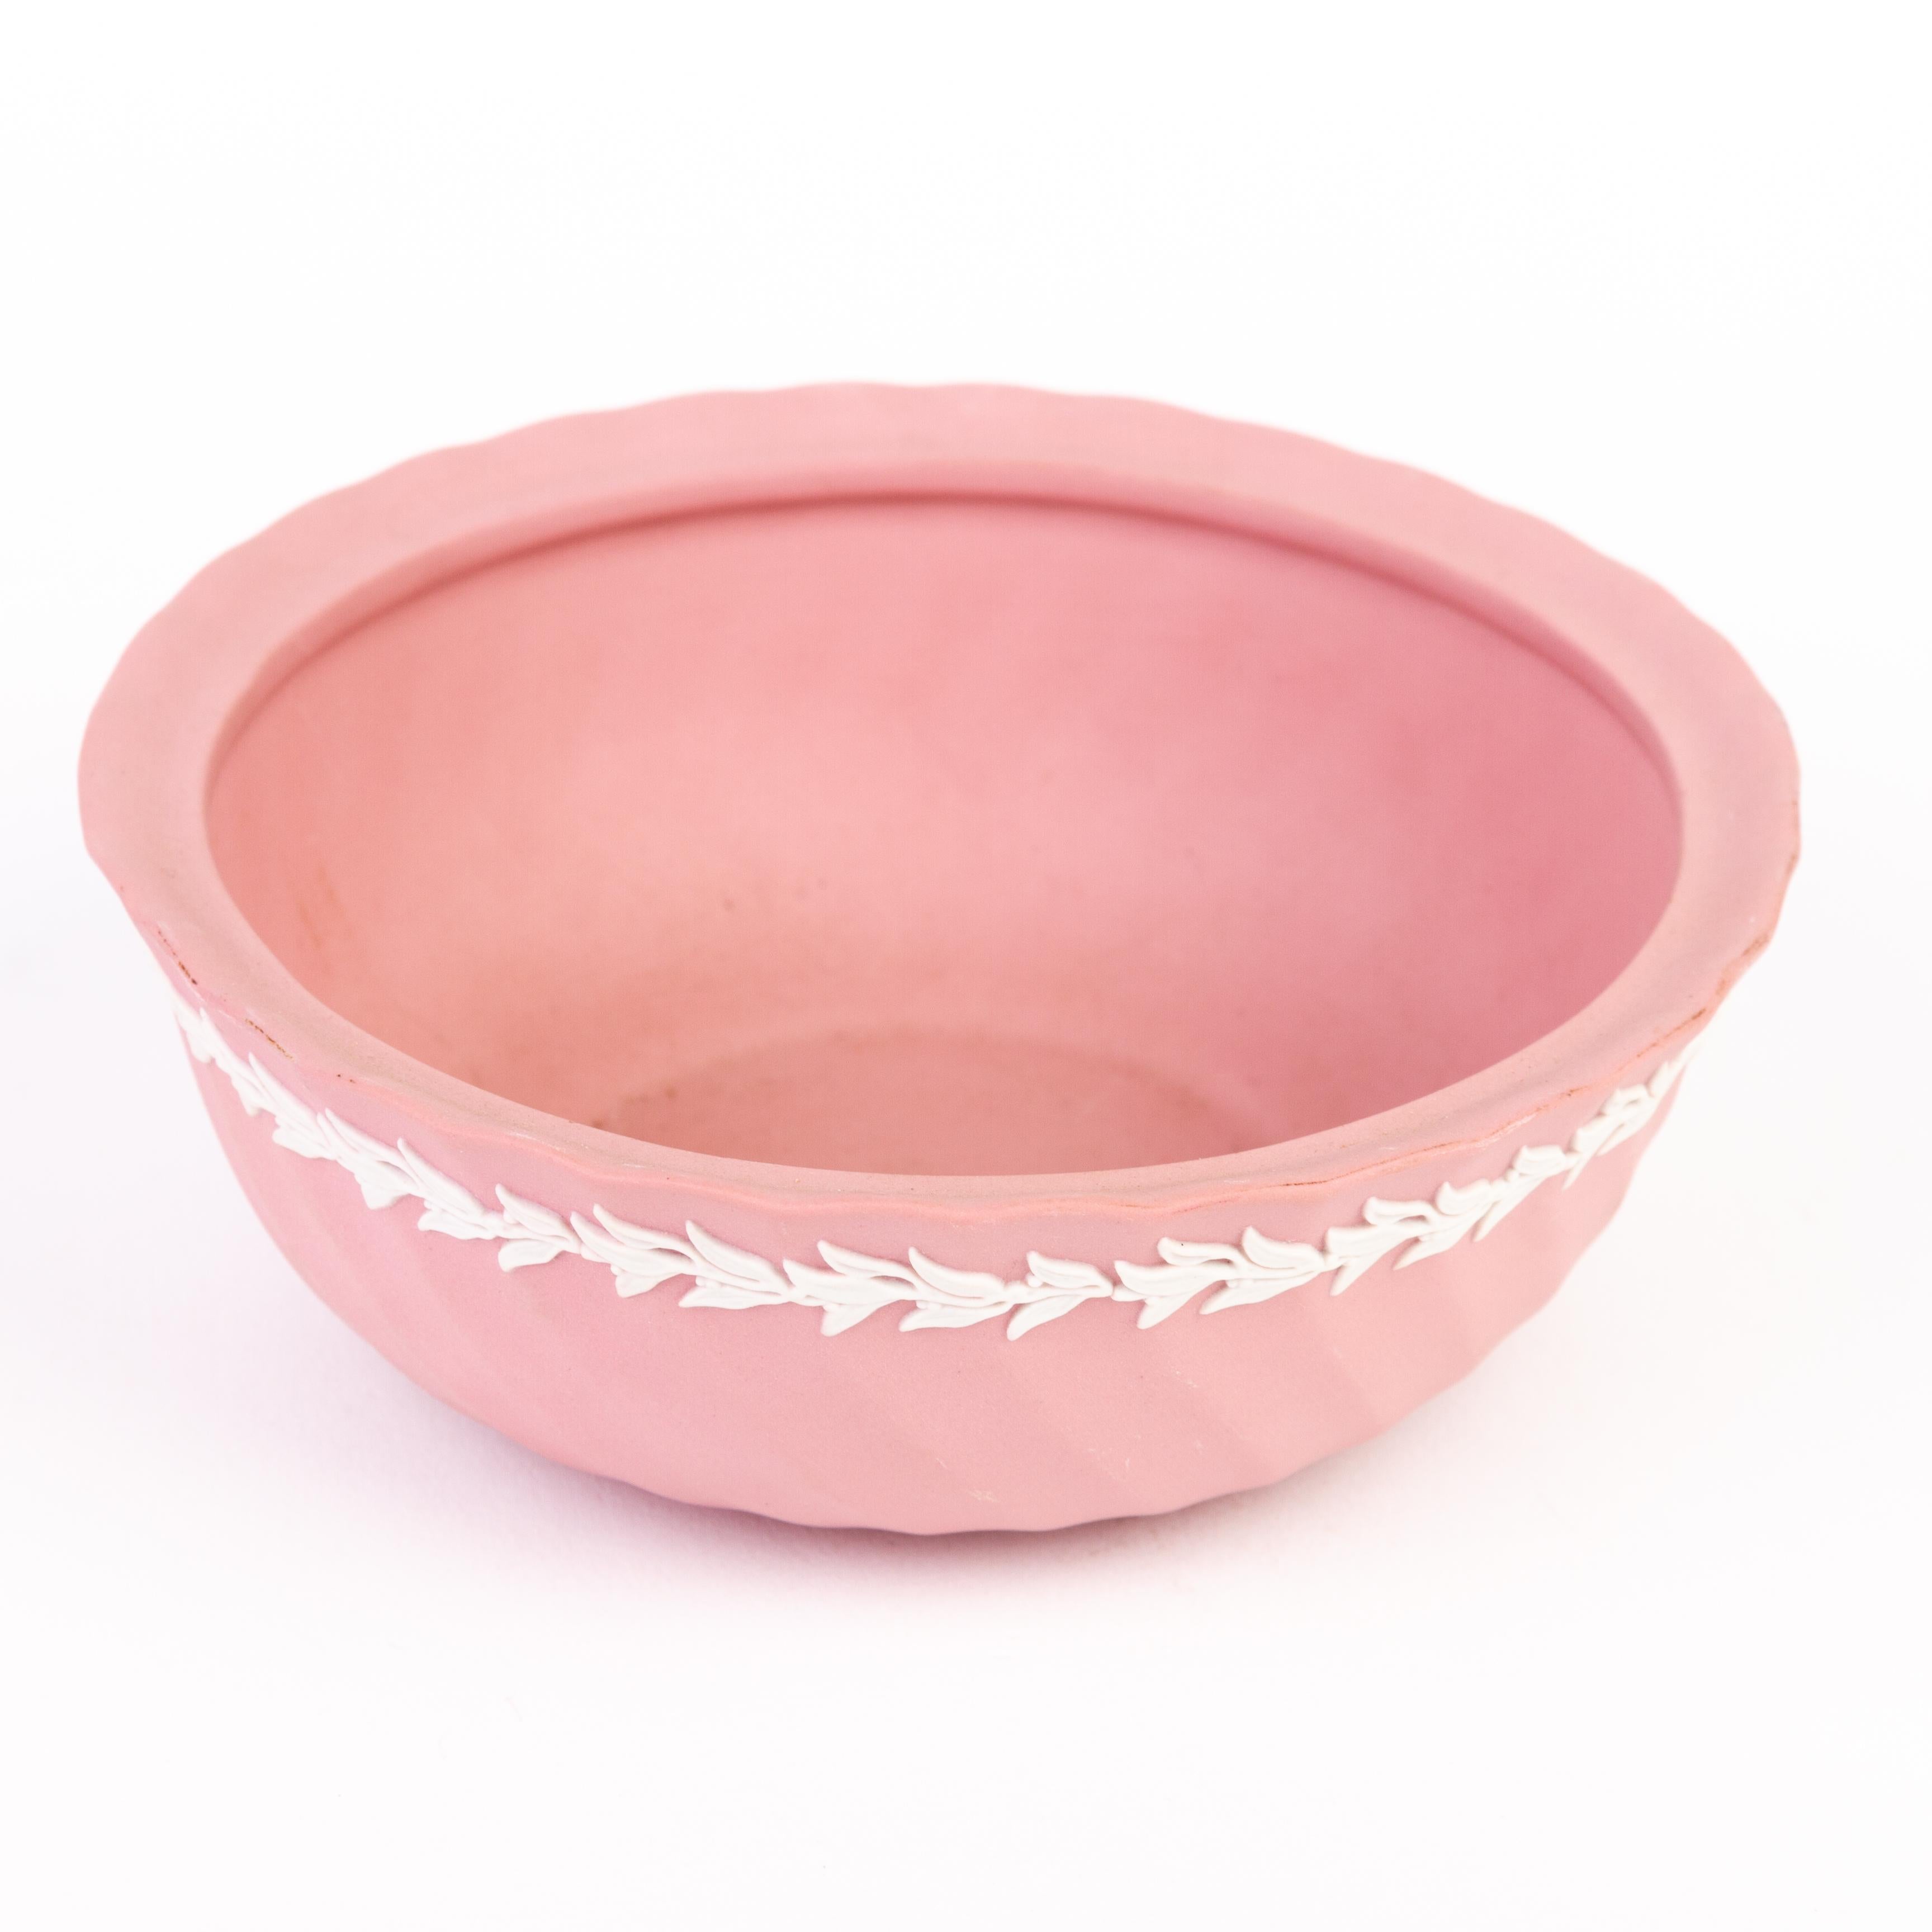 From a private collection.
Free international shipping
Wedgwood Pink Jasperware Bowl 